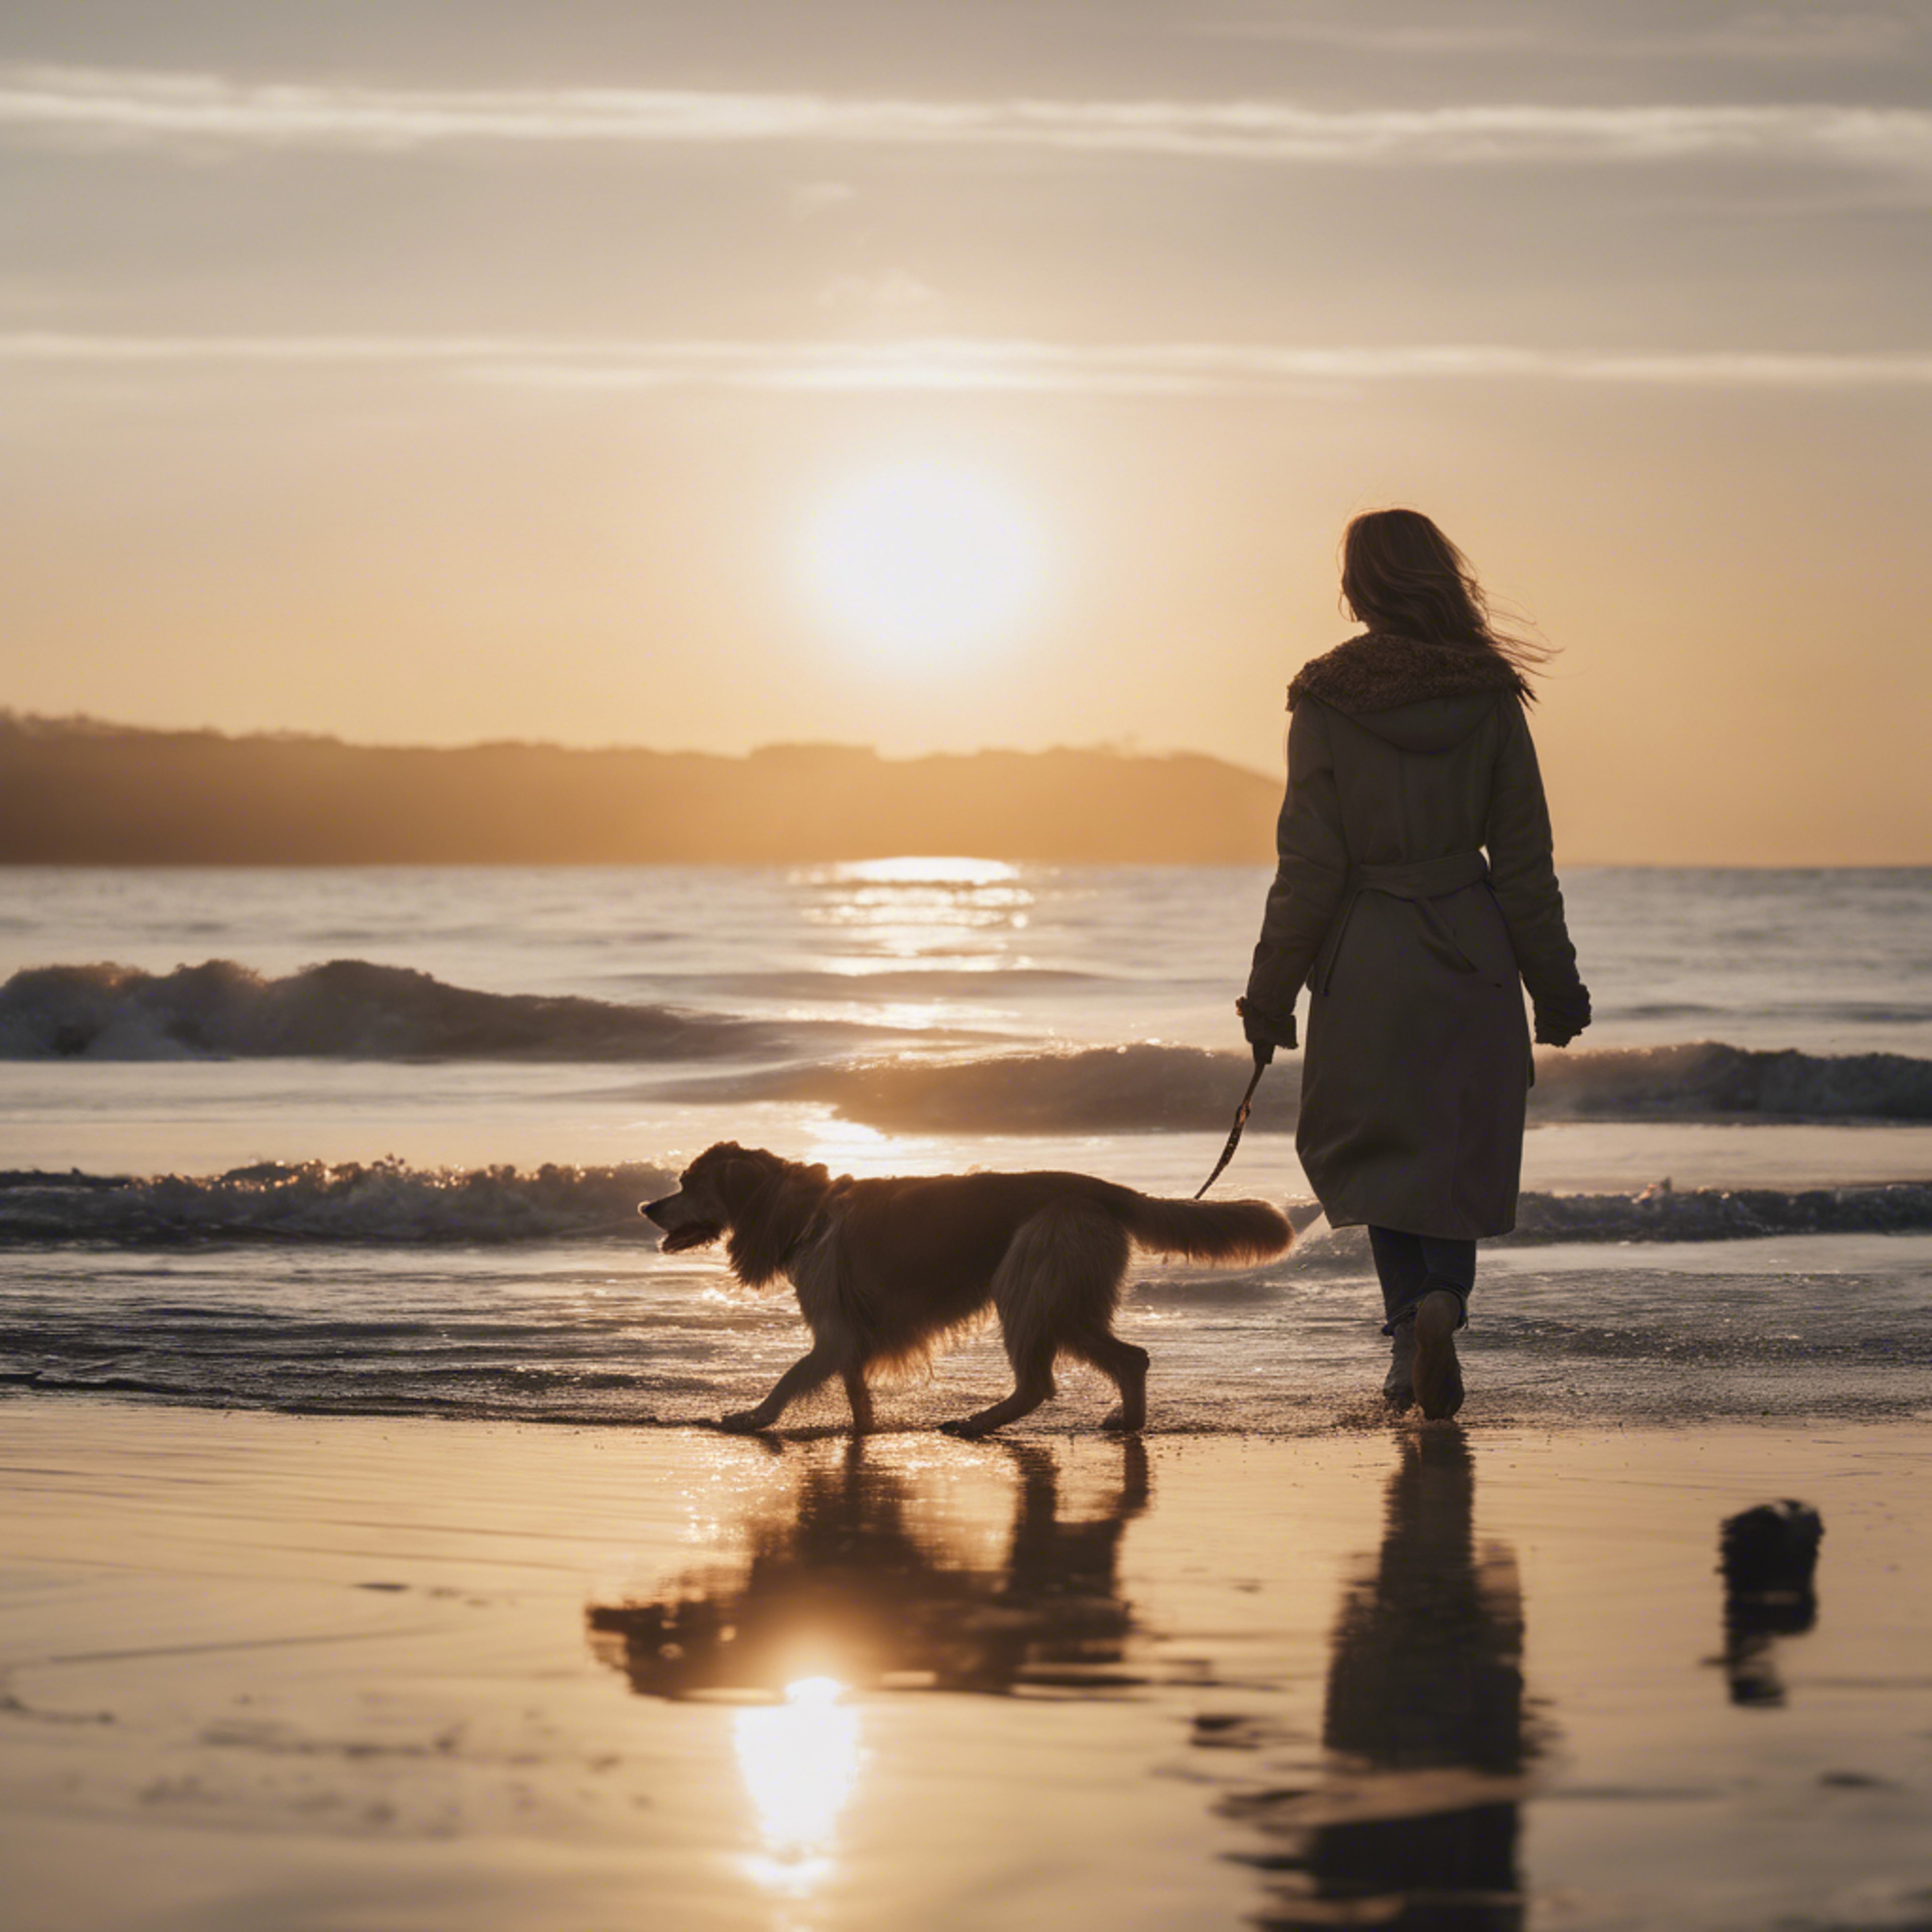 A beach scene with a woman walking her enthusiastic dog along the water's edge at sunset. Papel de parede[f9bc2ab3990f4caba062]